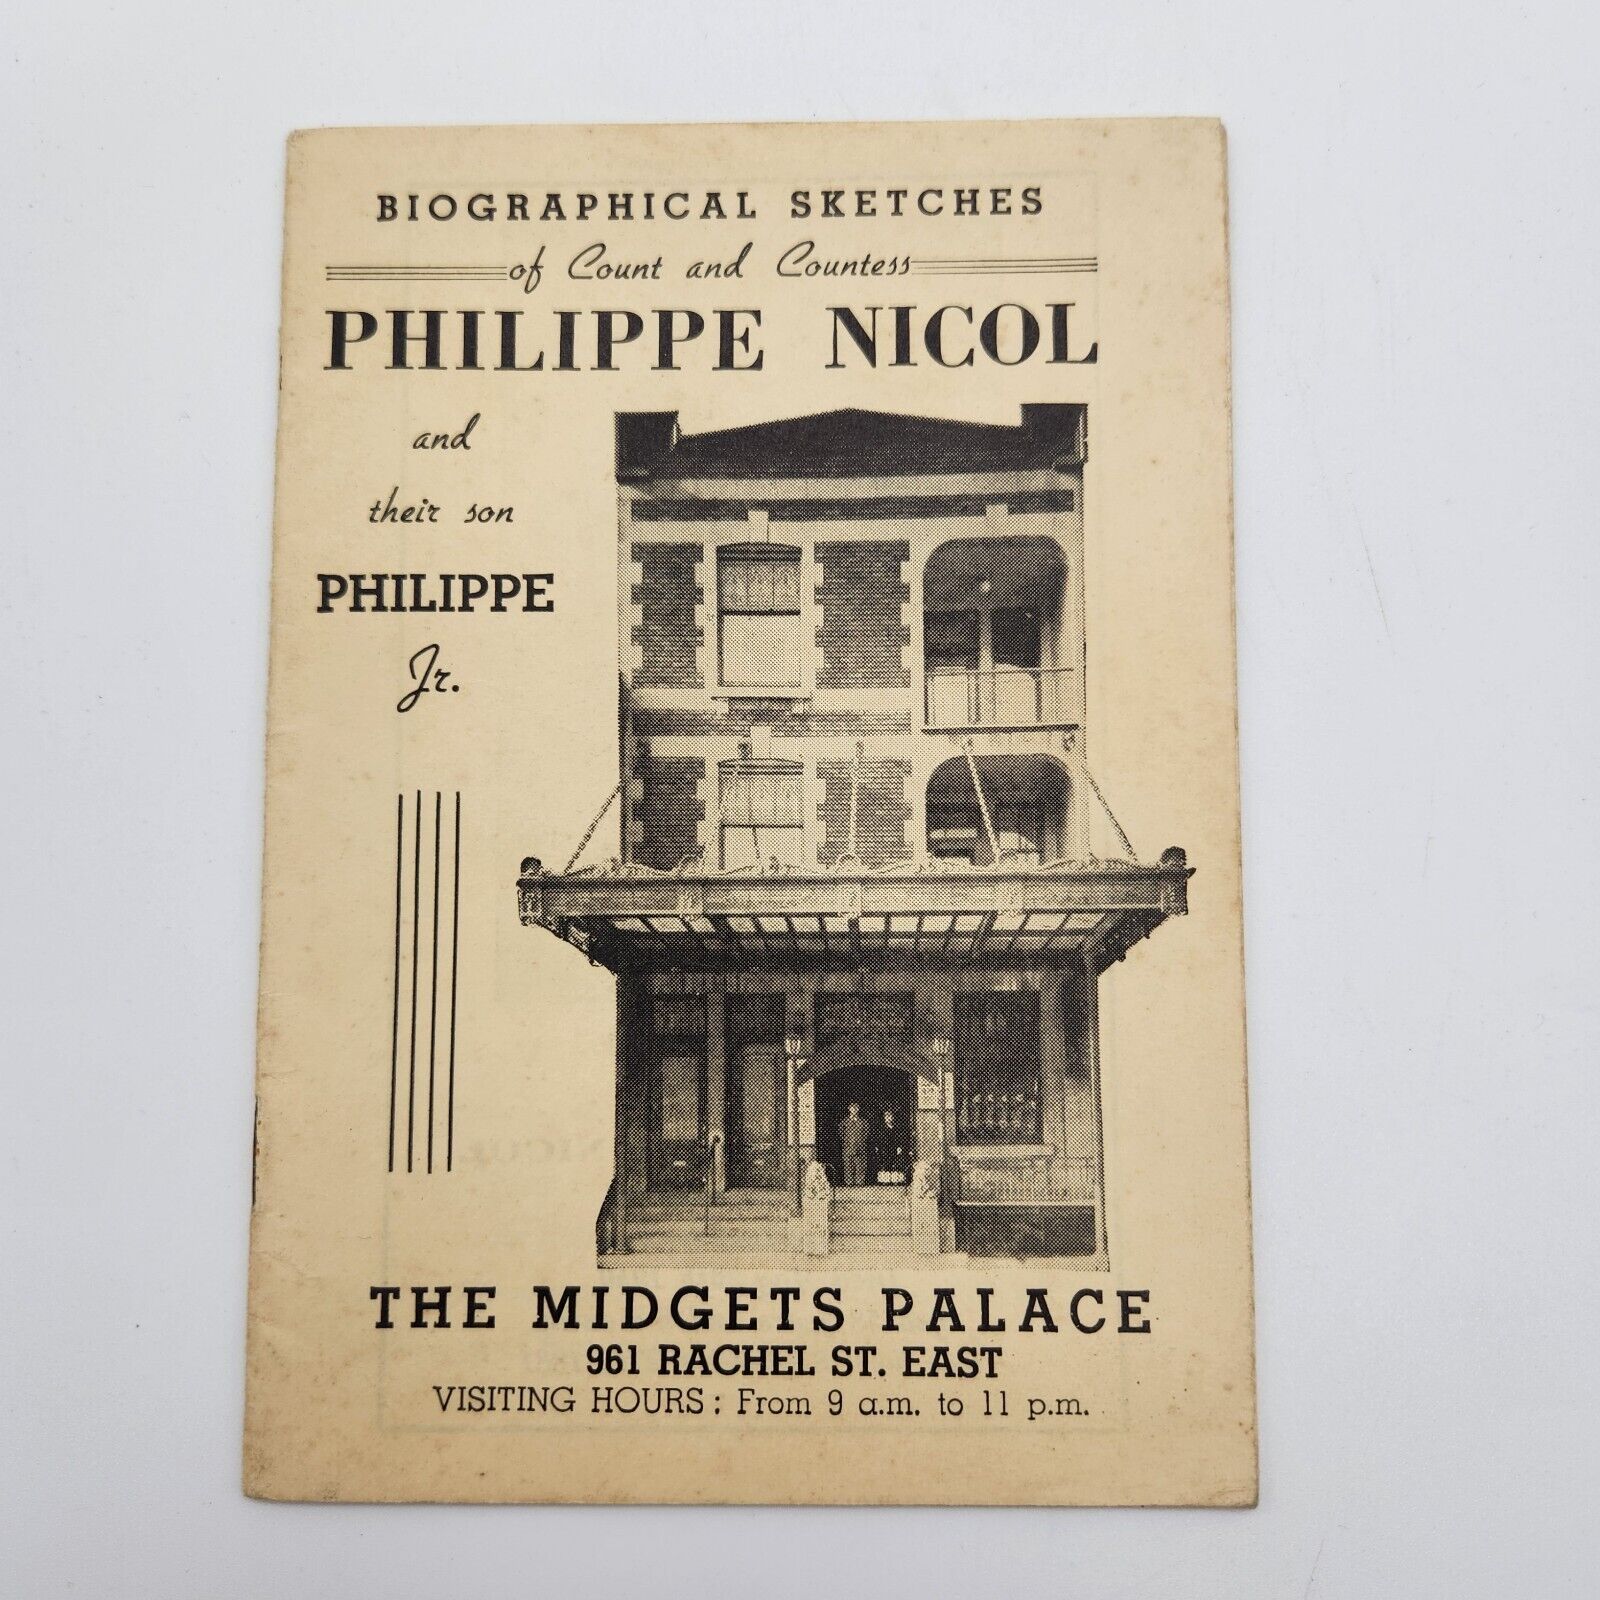 Vintage Philippe Nicol The Midgets Palace Biographical Sketches Souvenir Booklet